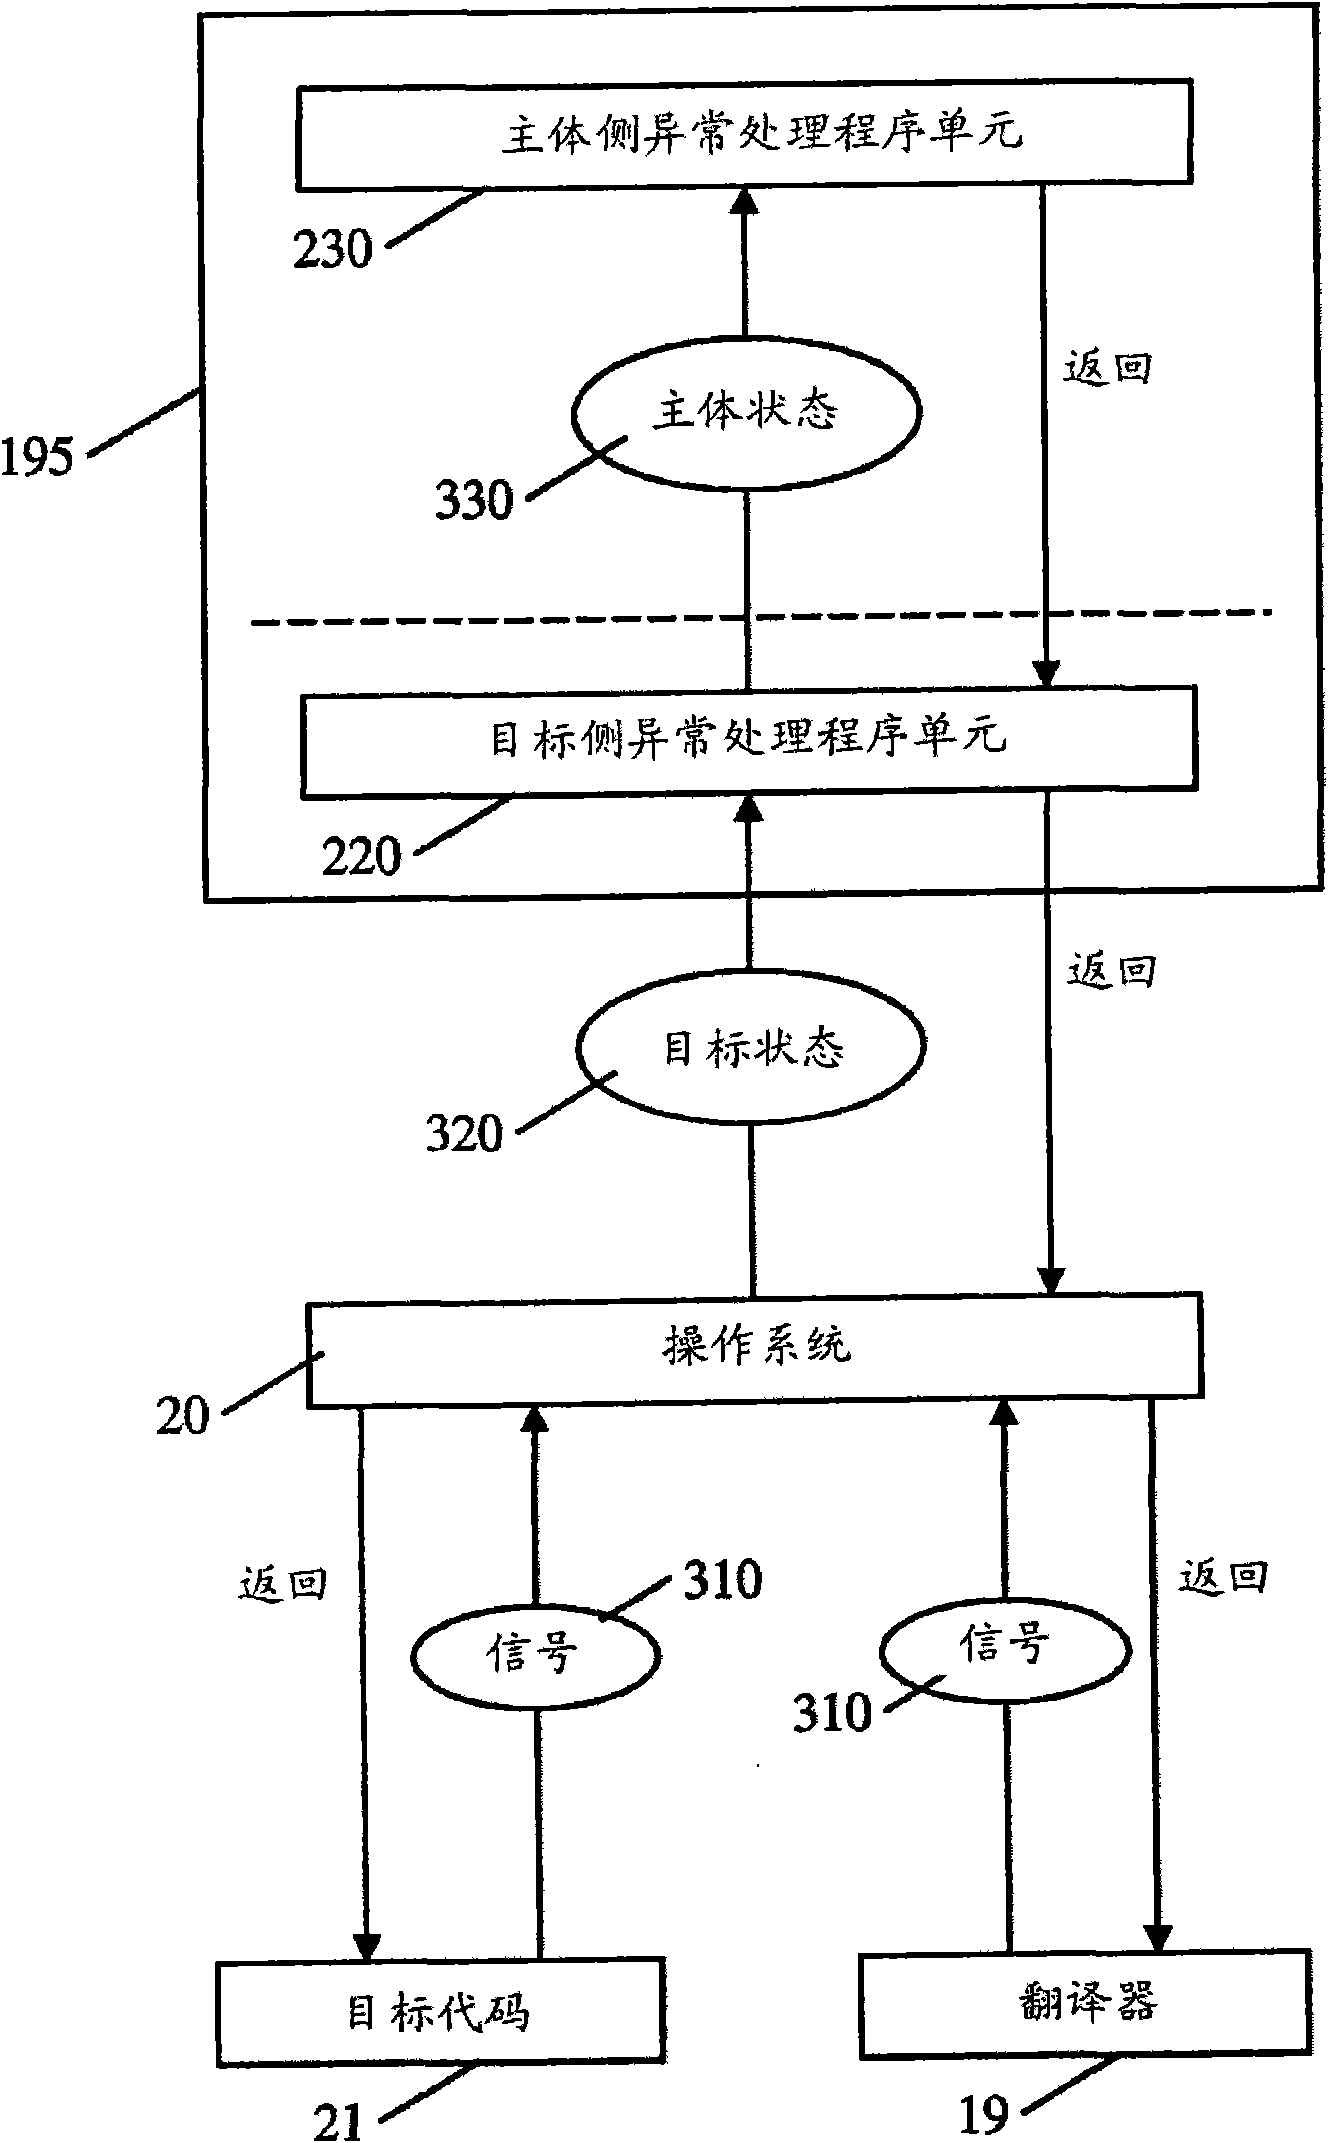 Apparatus and method for handling exception signals in a computing system